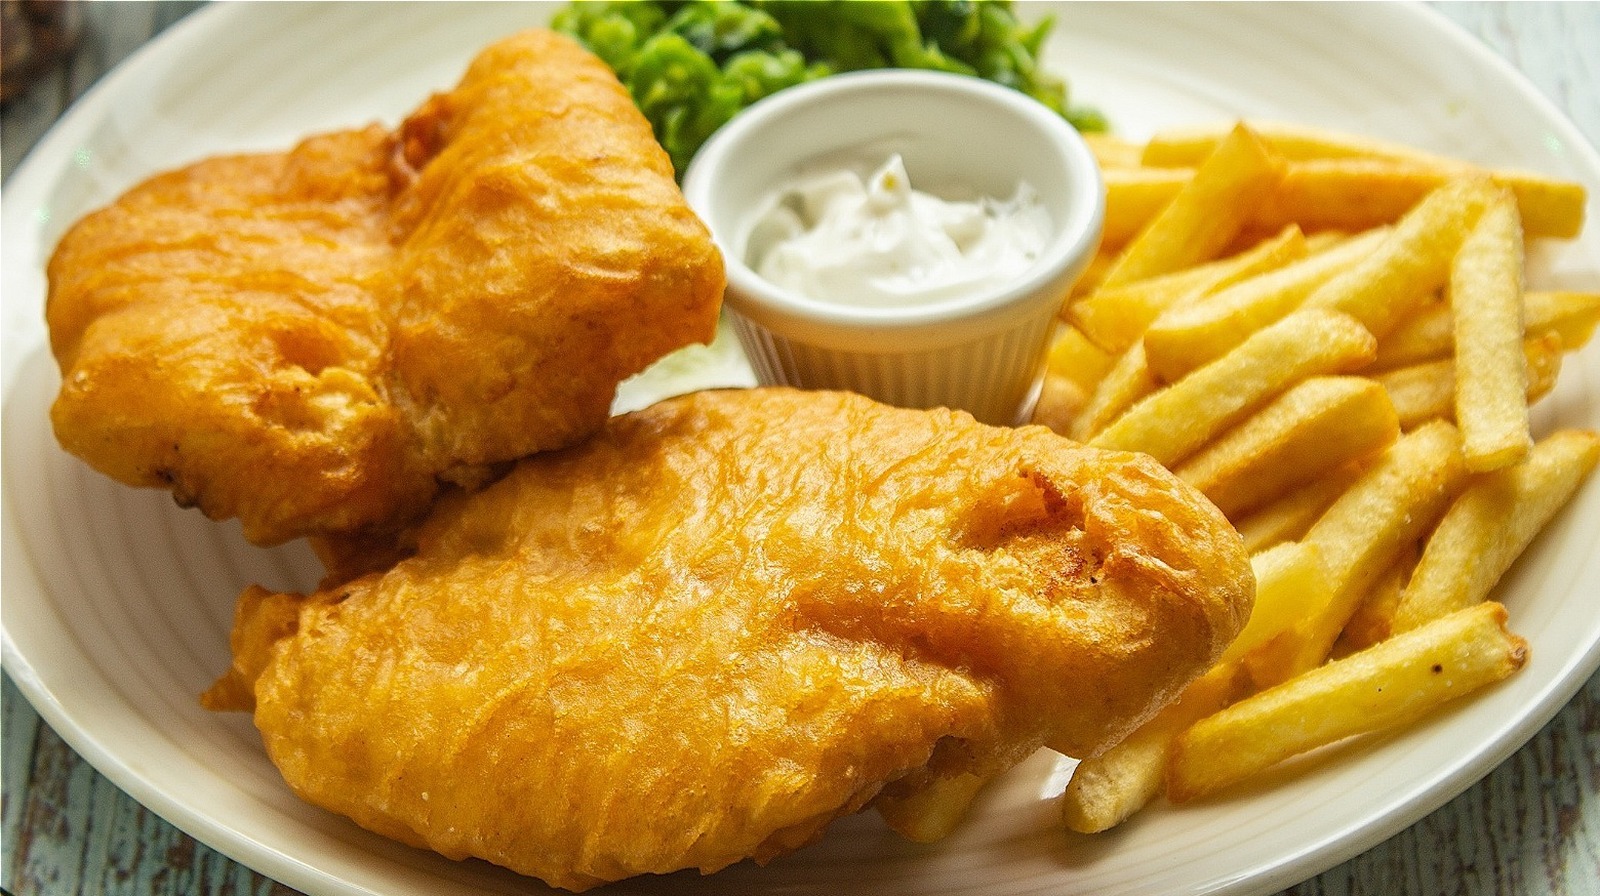 Guinness-battered Fish and Chips Recipe